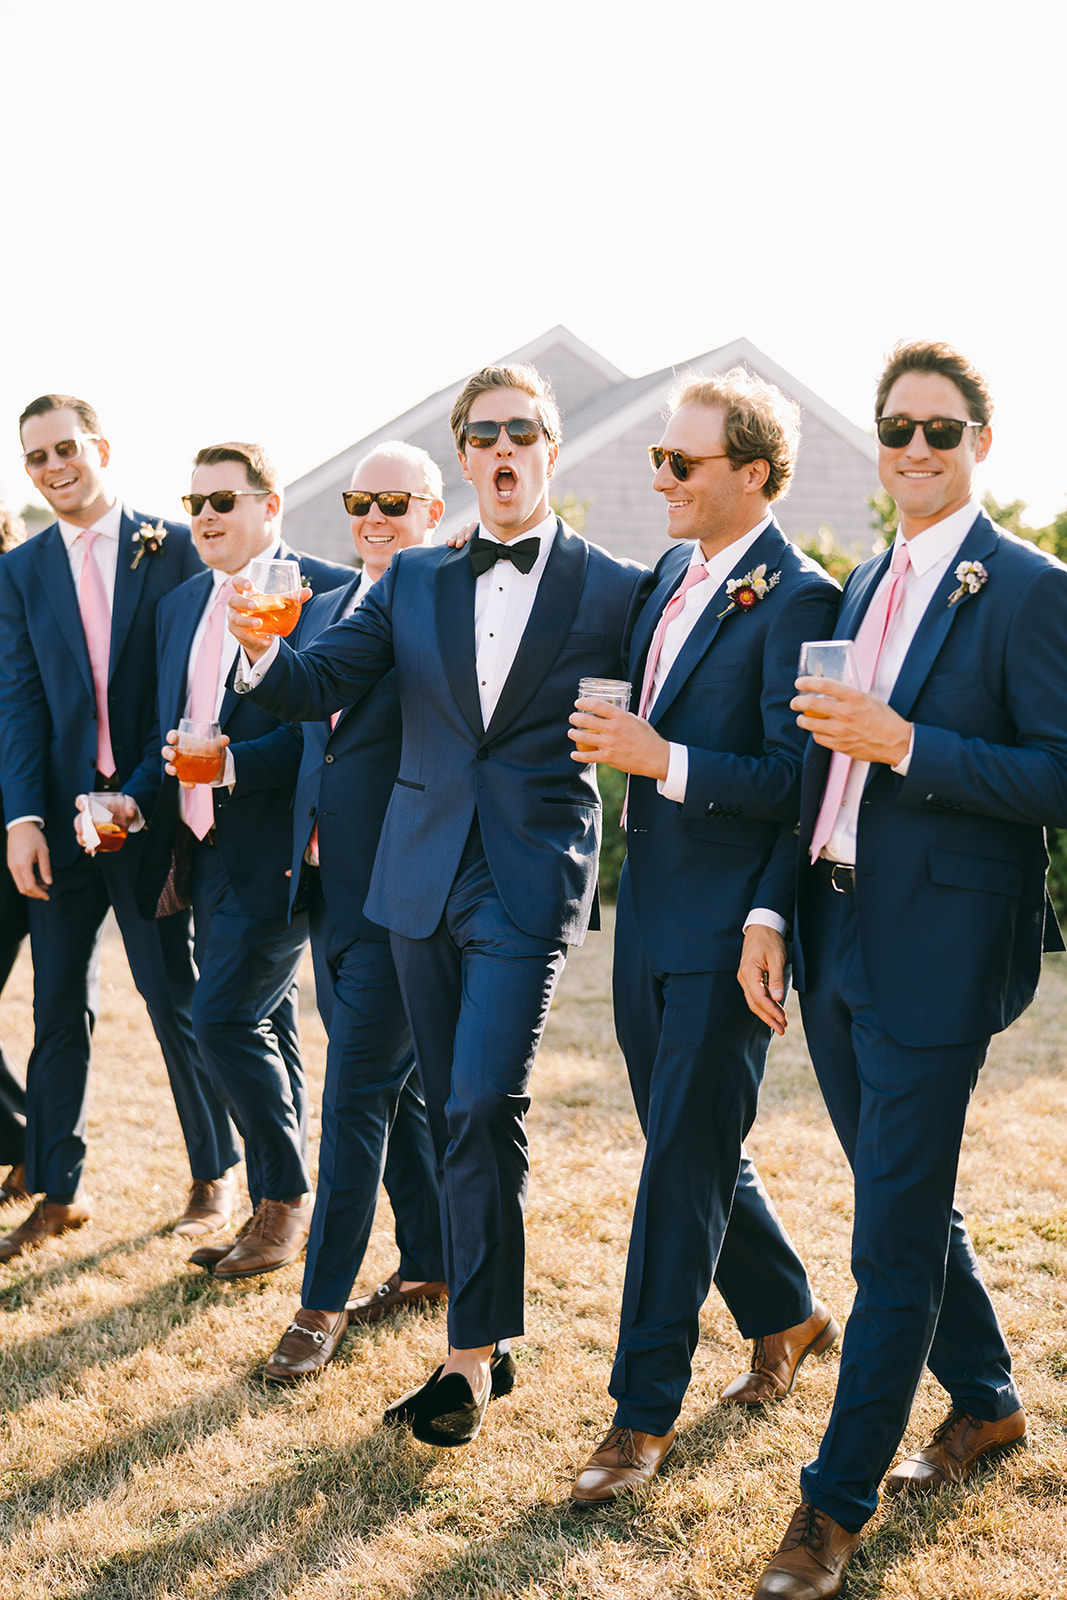 Groomsmen of wedding party walking together being excited and holding drinks 